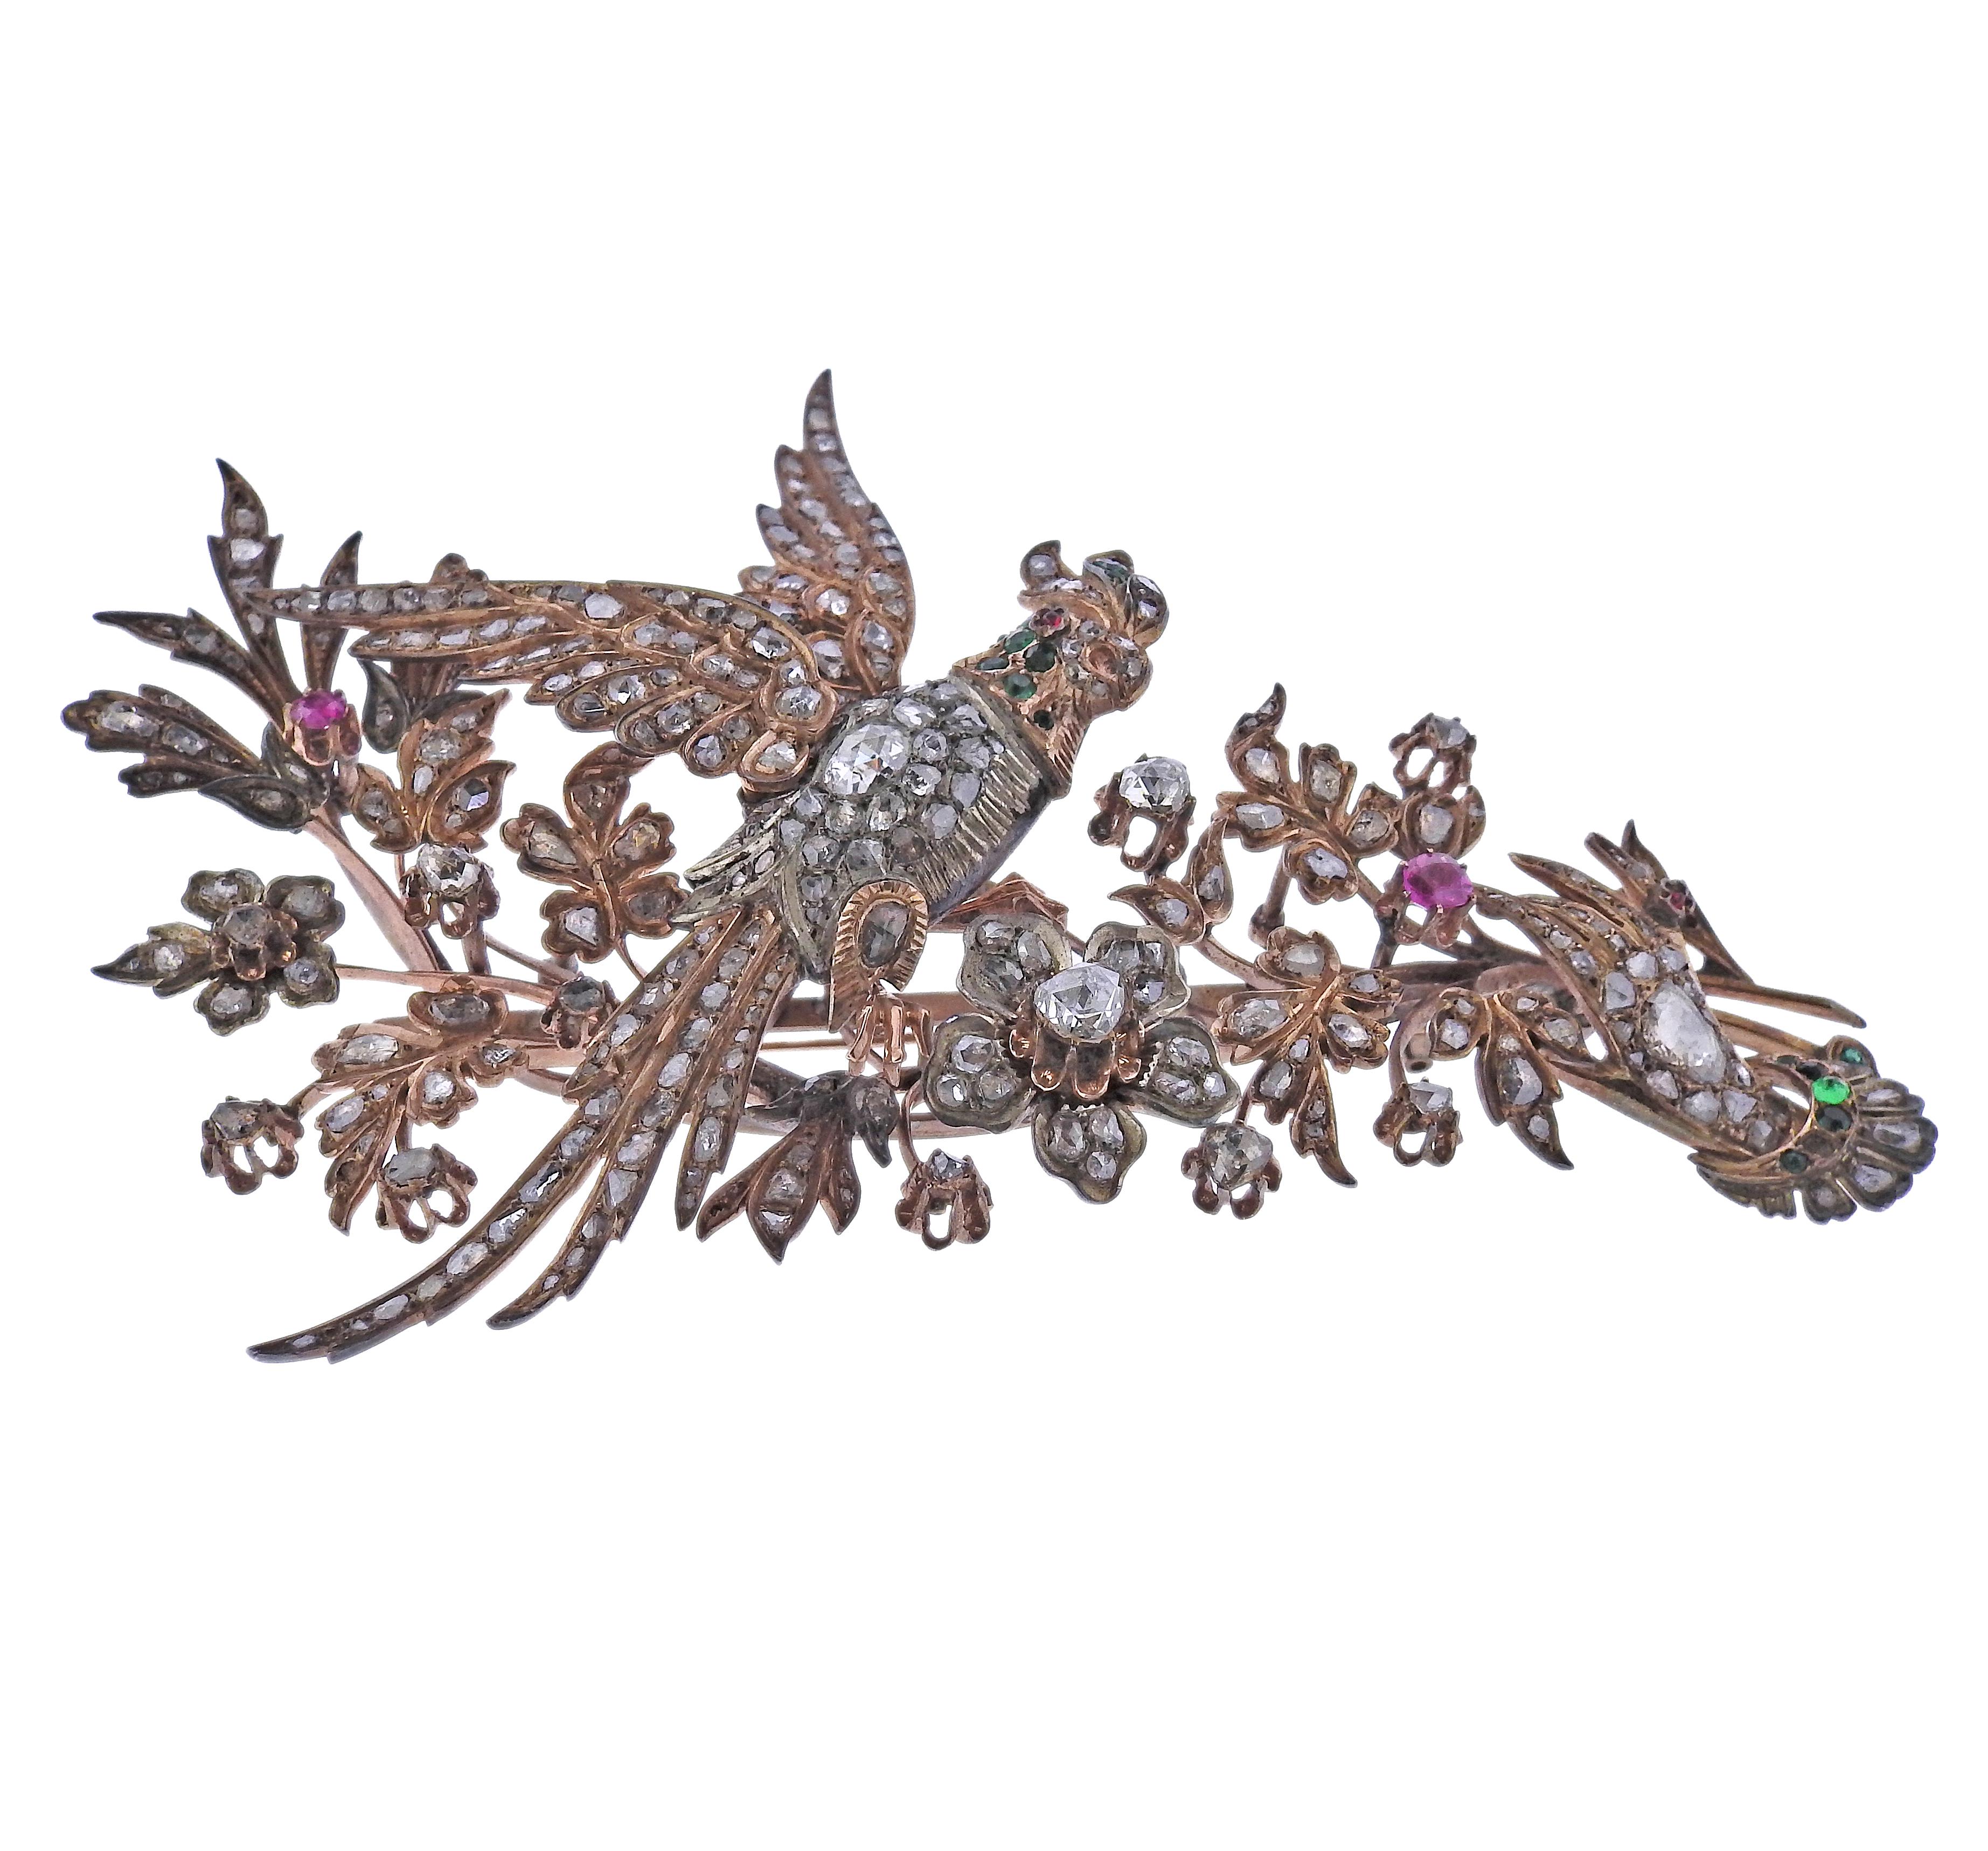 Large antique gold brooch, depicting a bird with flowers. Set with rose cut diamonds, emeralds and rubies. Multiple stones are chipped and/or missing. Brooch measures 4.5